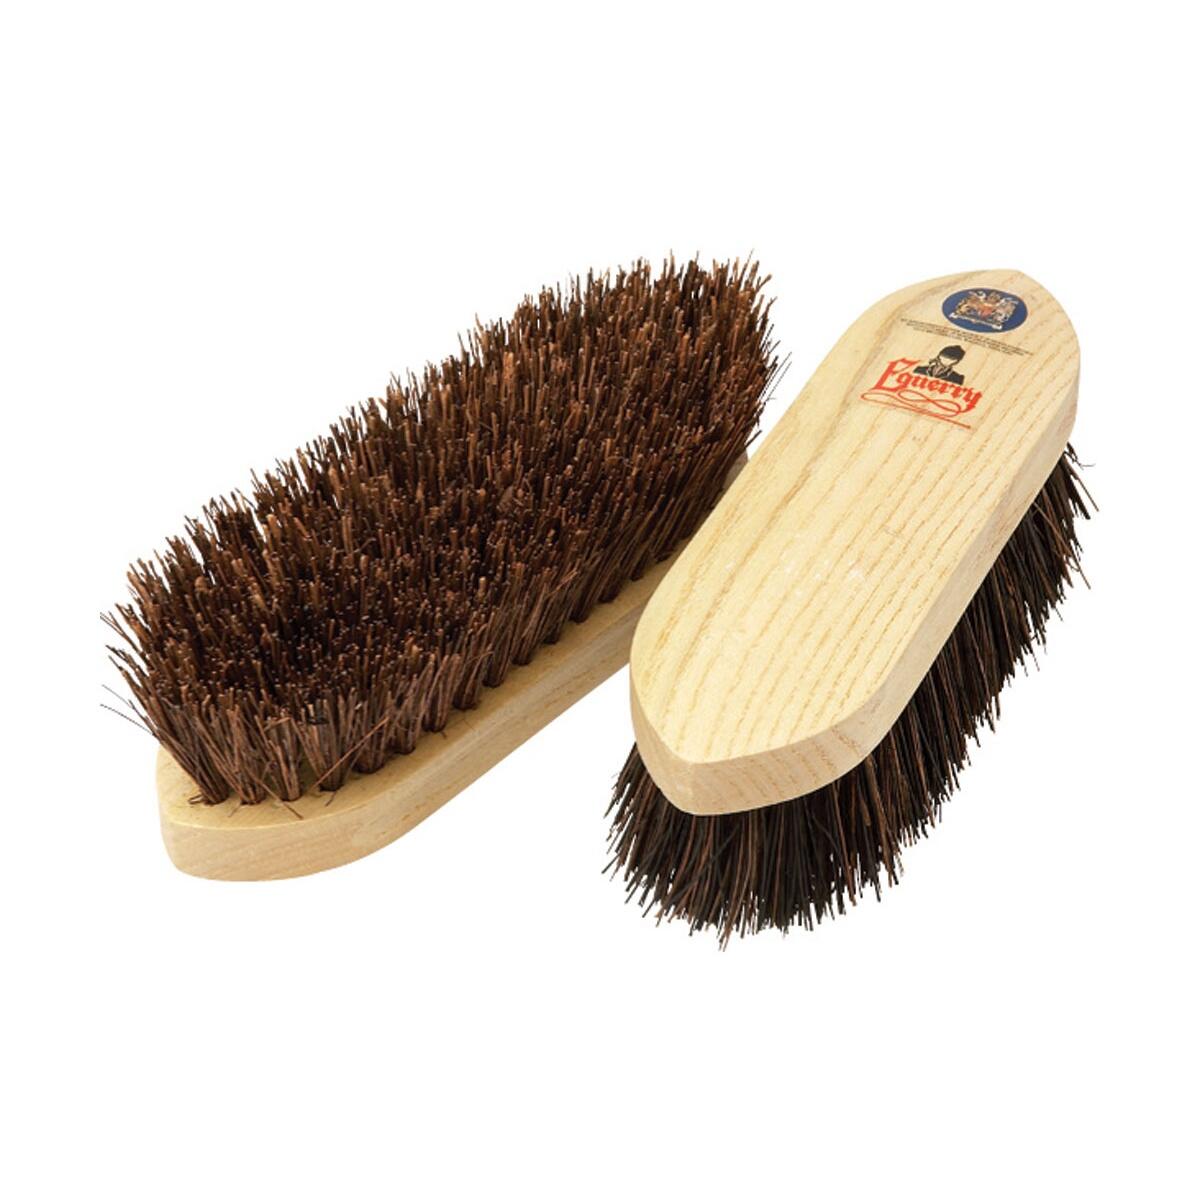 VALE BROTHERS Equerry Wooden Bassine Dandy Brush (Brown)